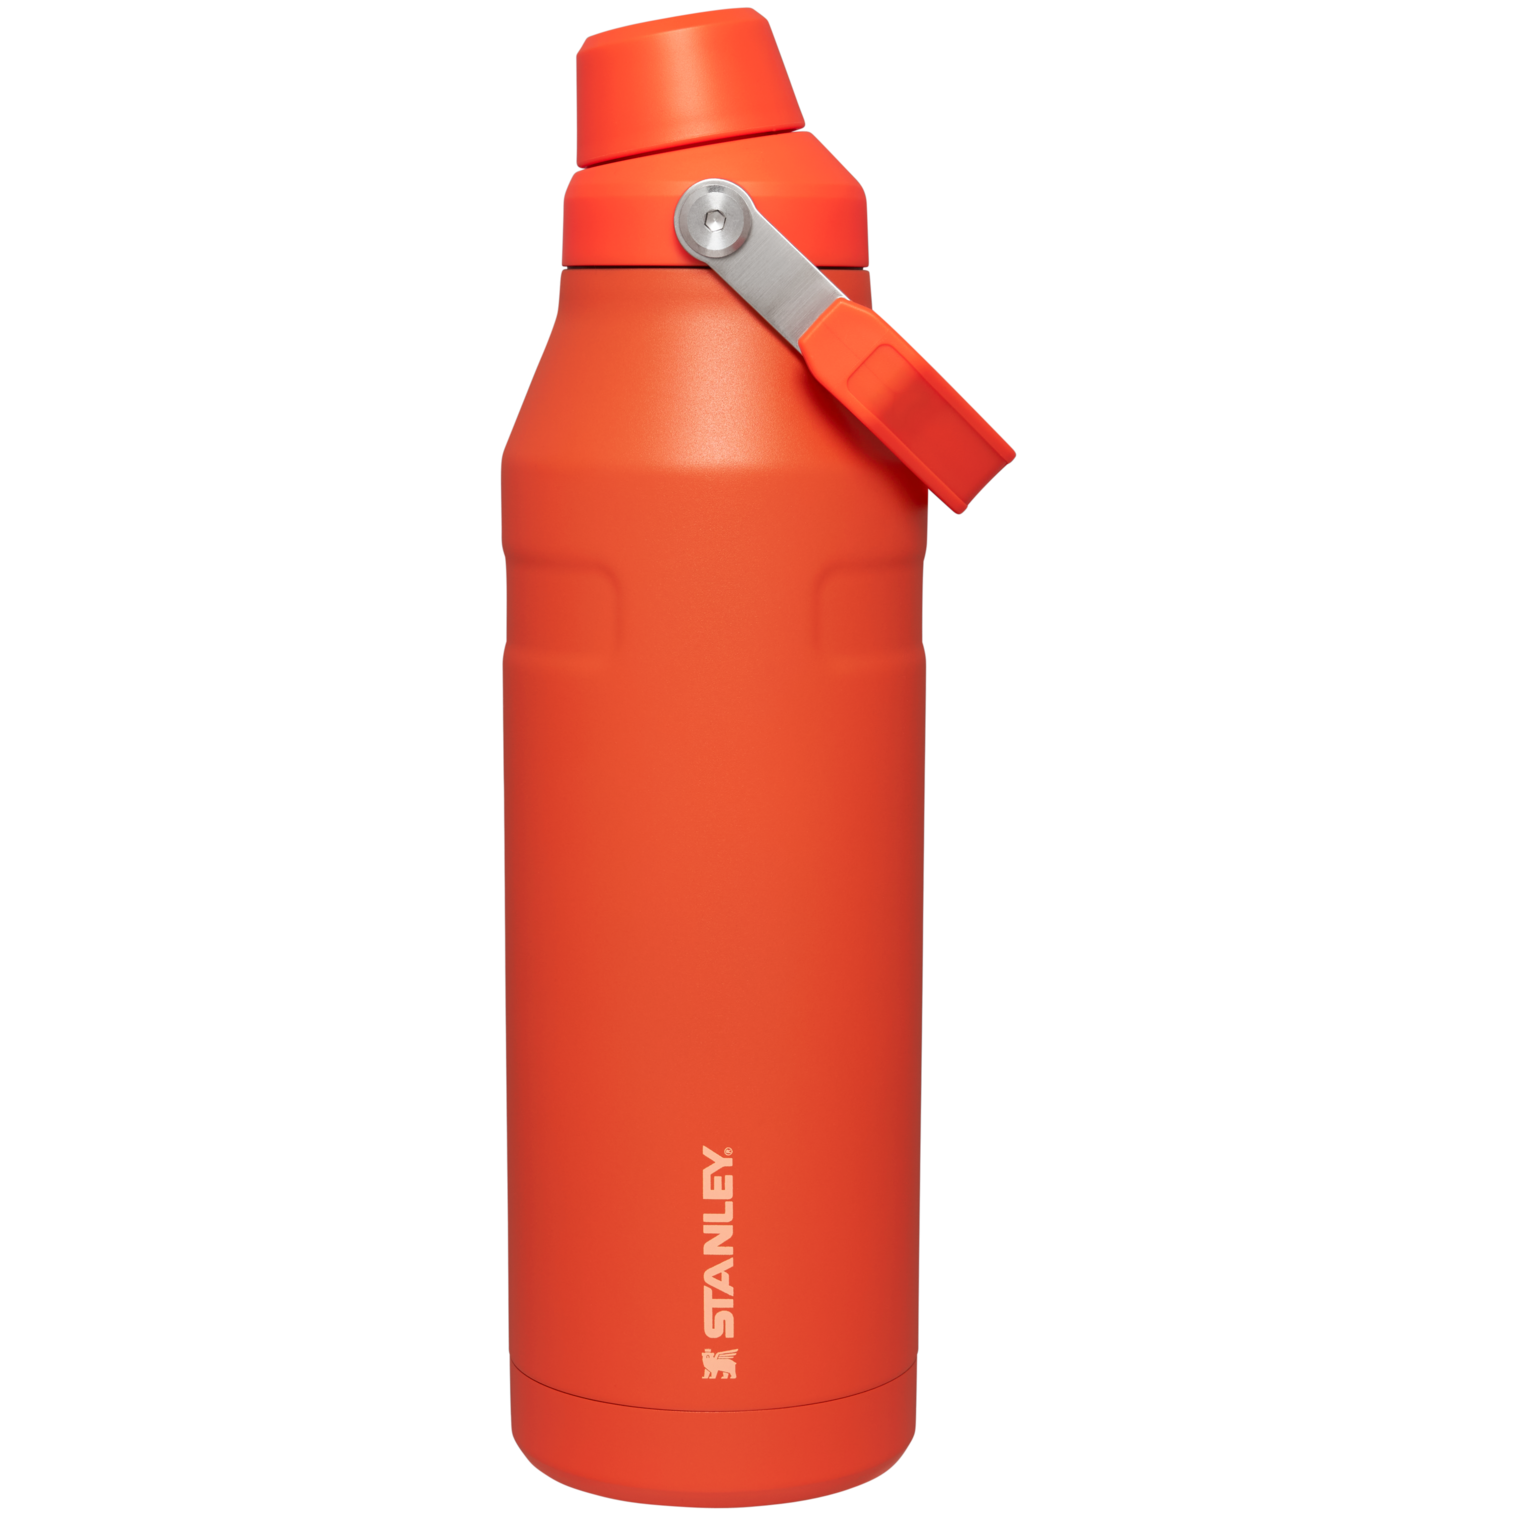 IceFlow Bottle with Fast Flow Lid | 50 oz Tigerlily